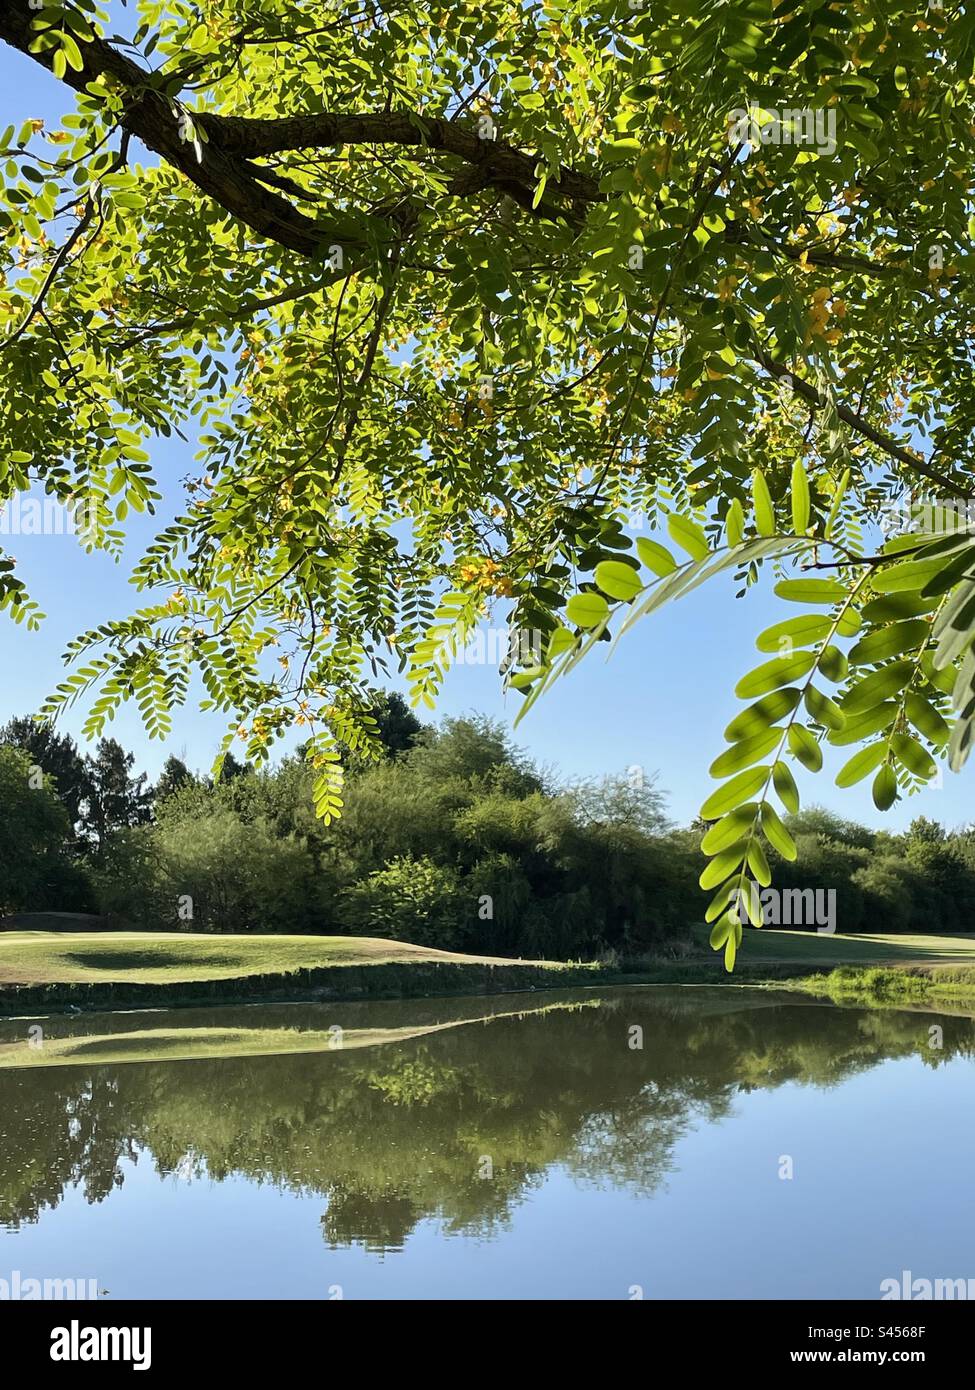 Rosewood tree in bloom, Tipuana Tipu, backlight leaves and yellow blossoms, golf course pond reflections, blue sky, Scottsdale, Arizona Stock Photo